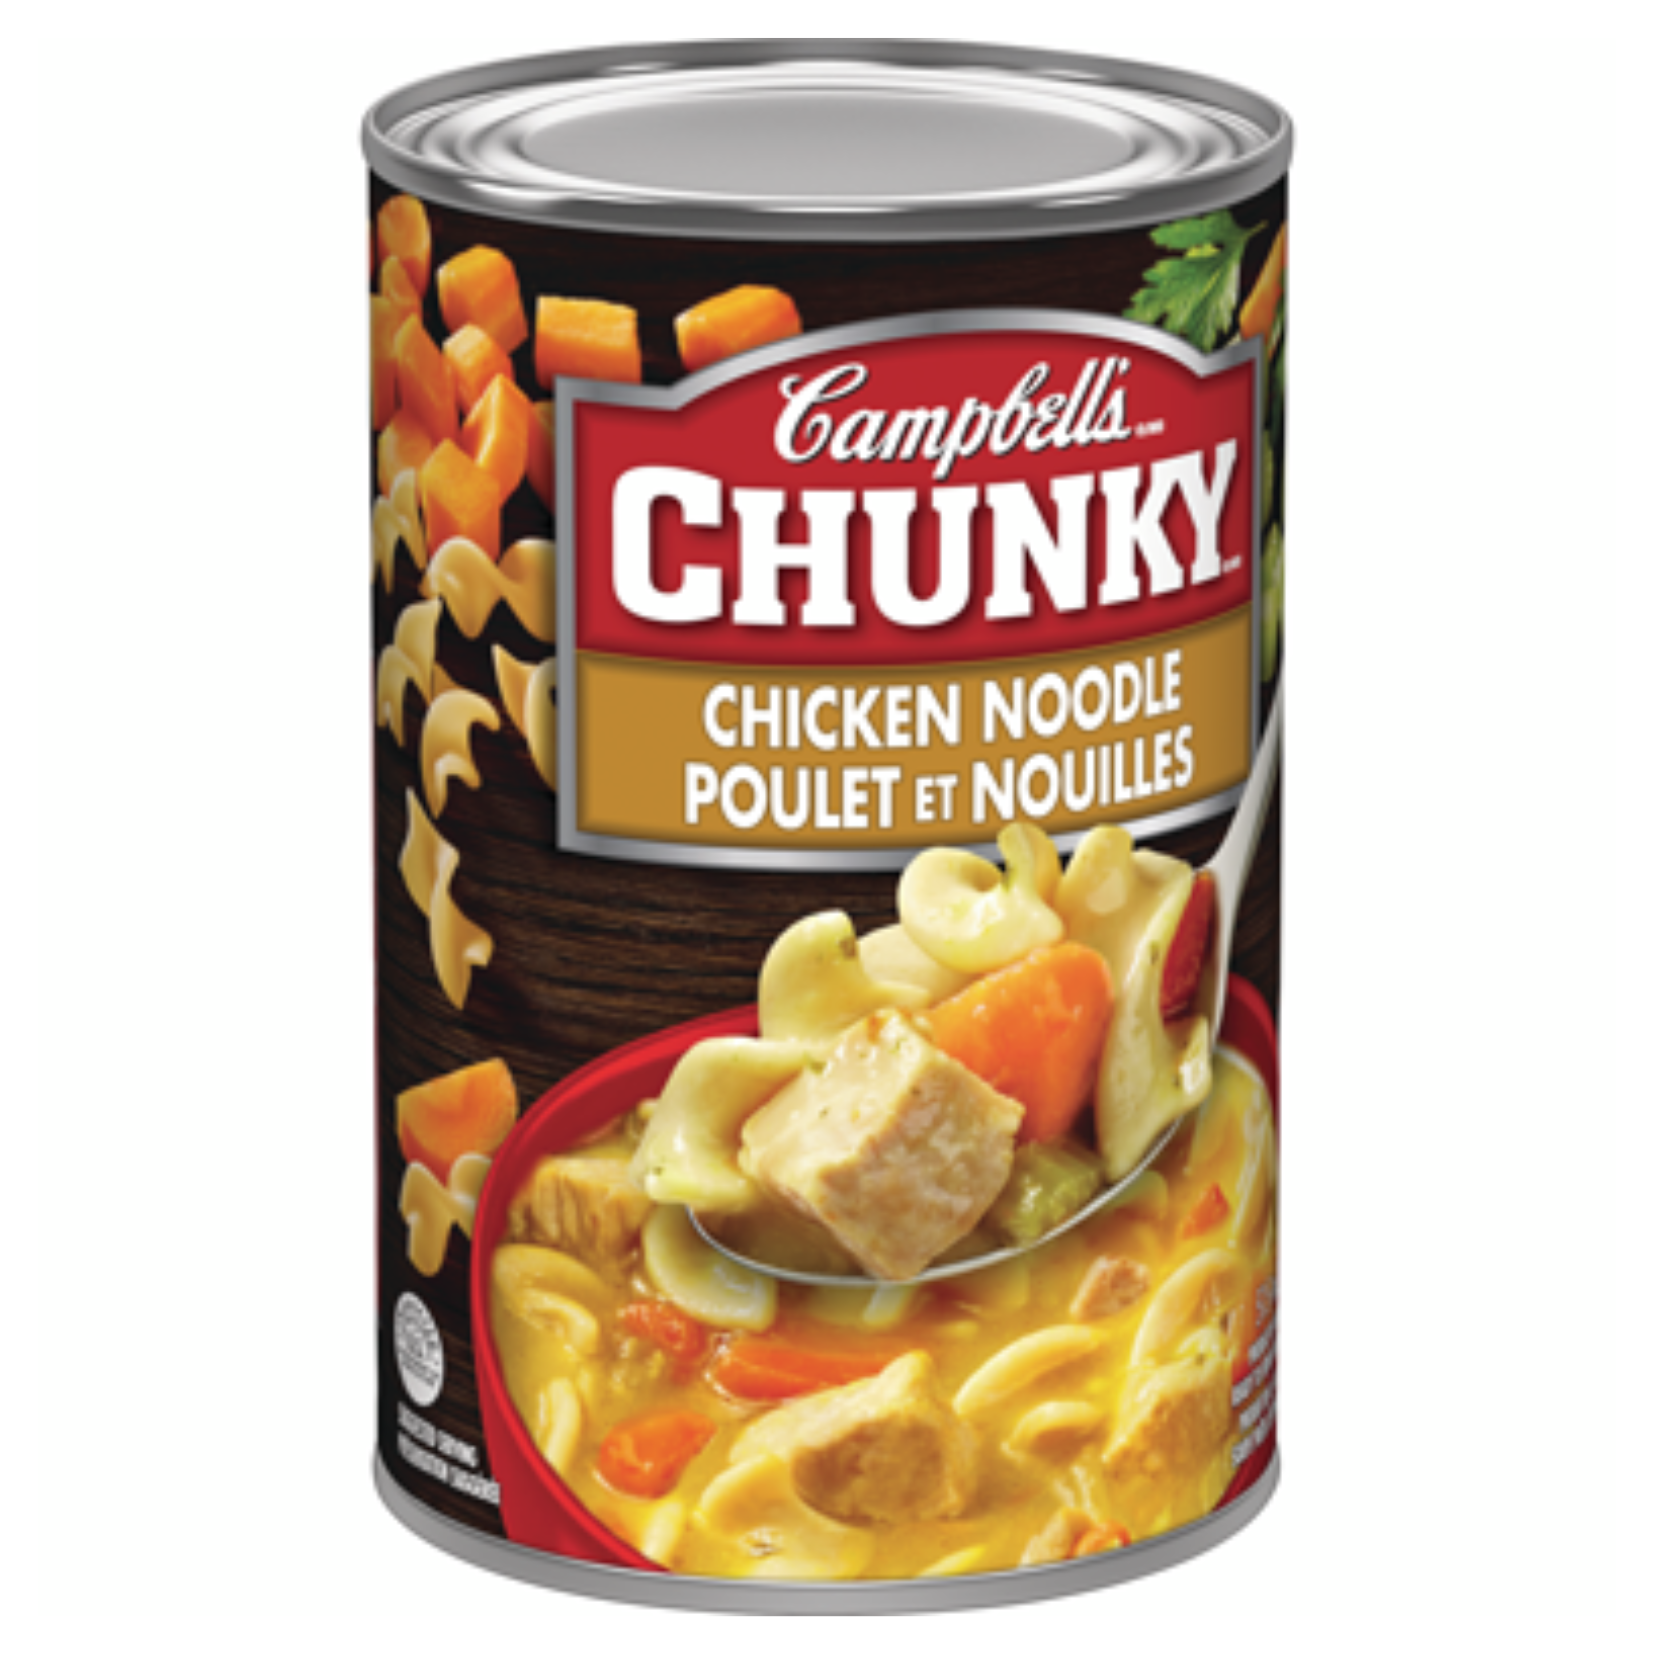 Campbell's Chunky Chicken Noodle Soup 515ml